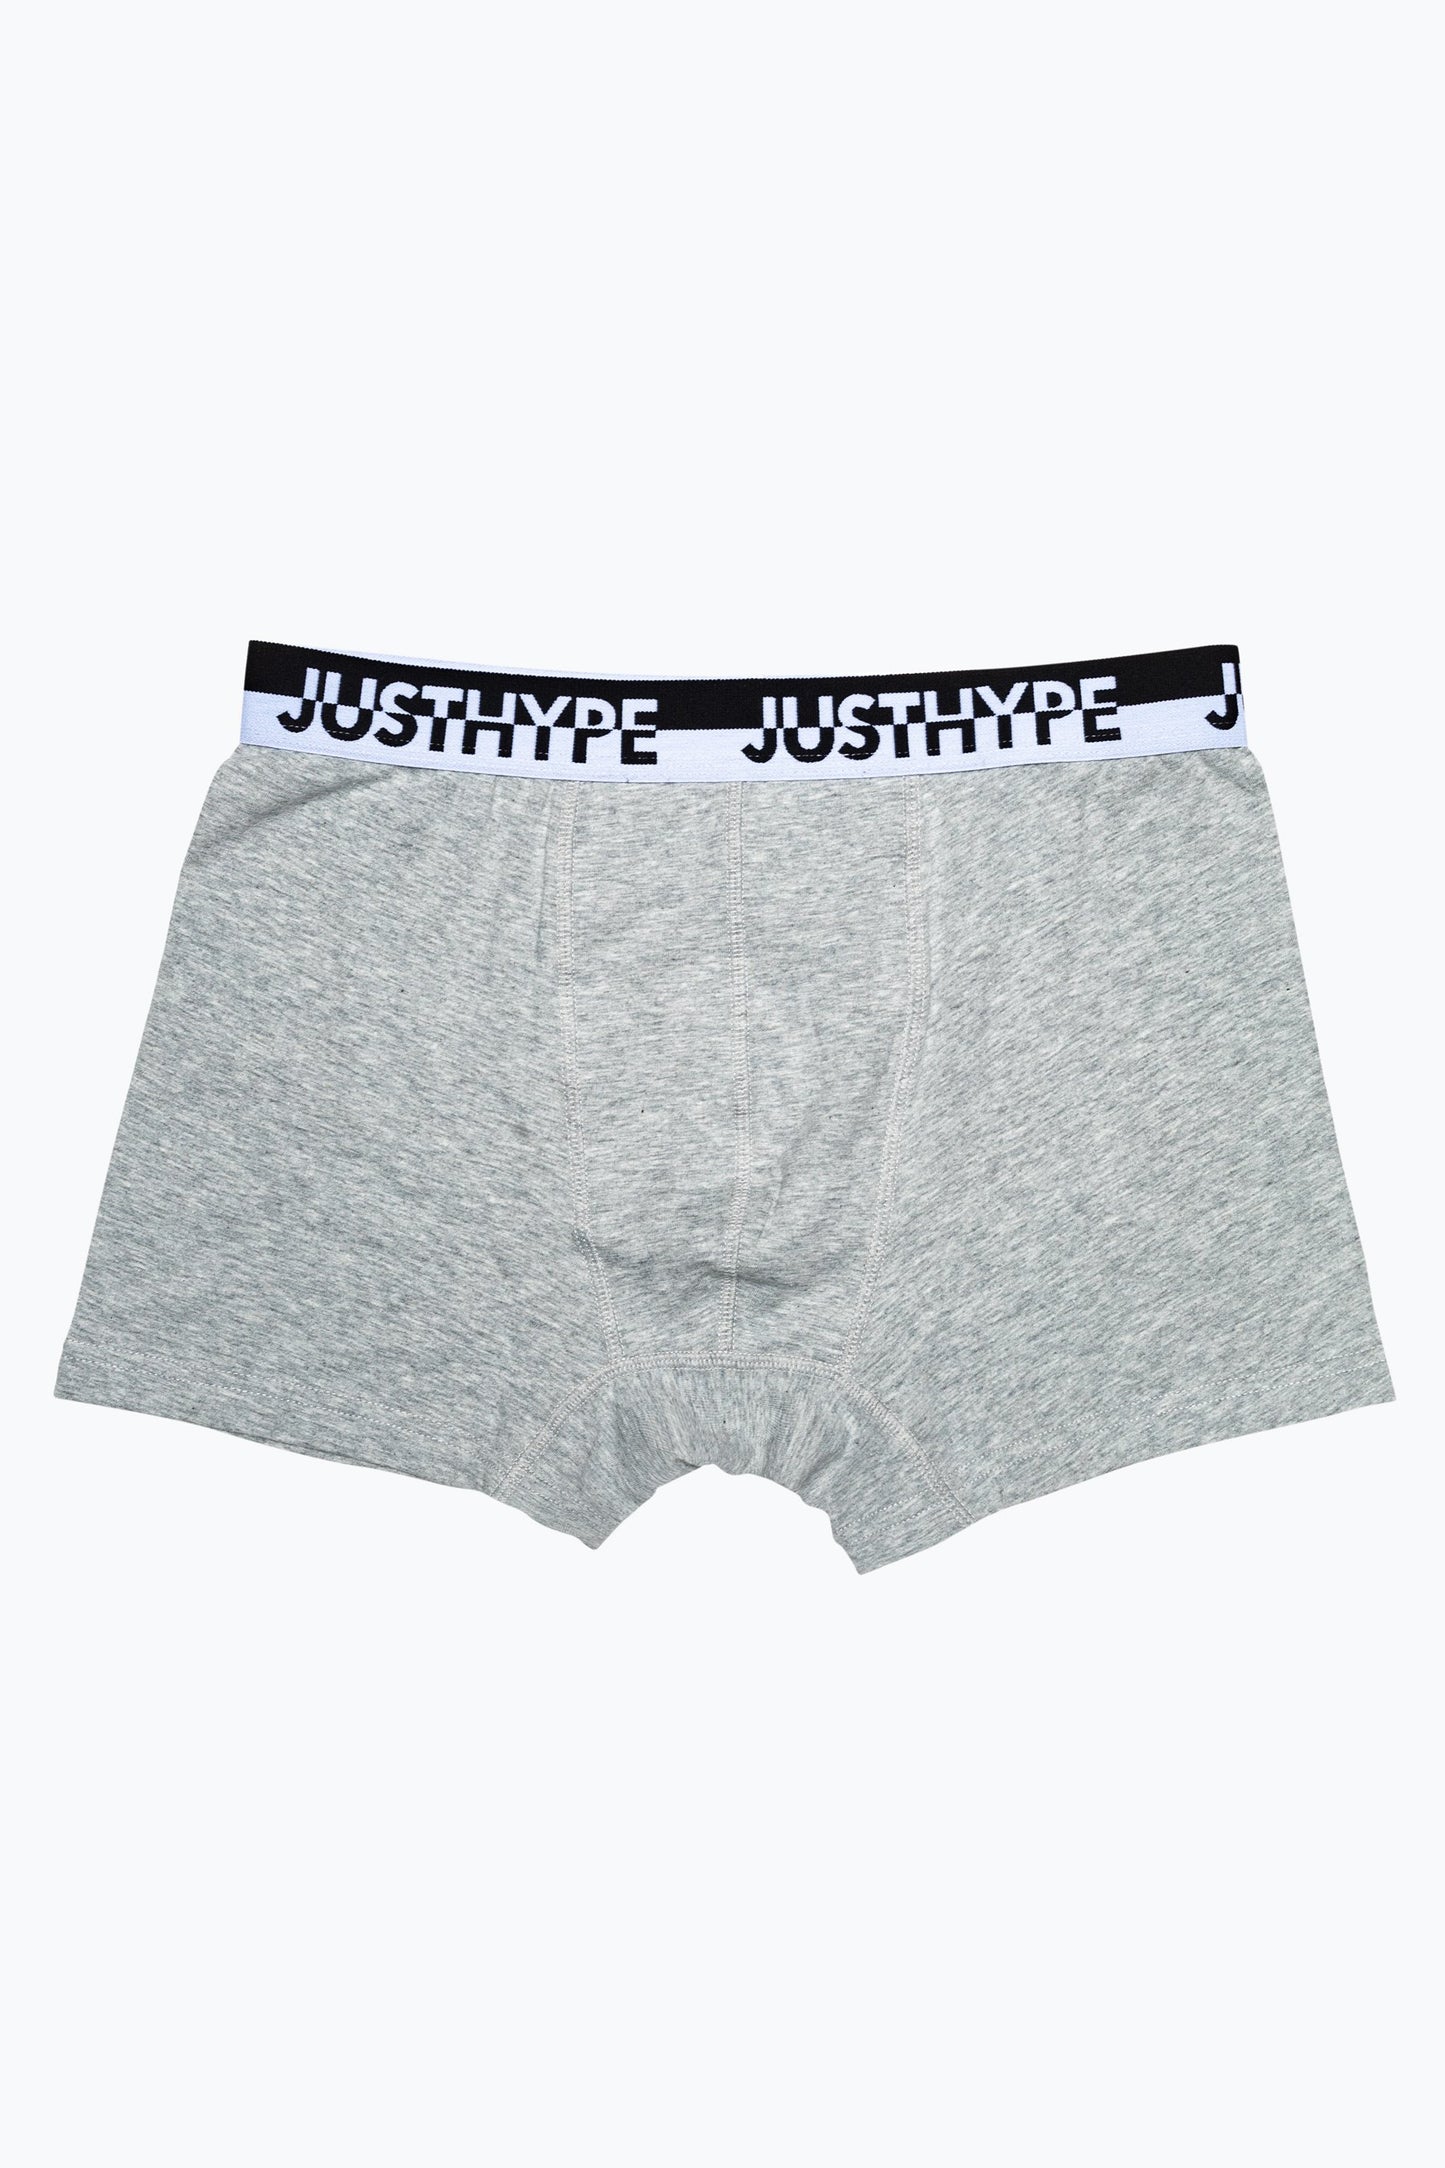 Hype 3 Pack Aop Justhype Kids Boxer Shorts